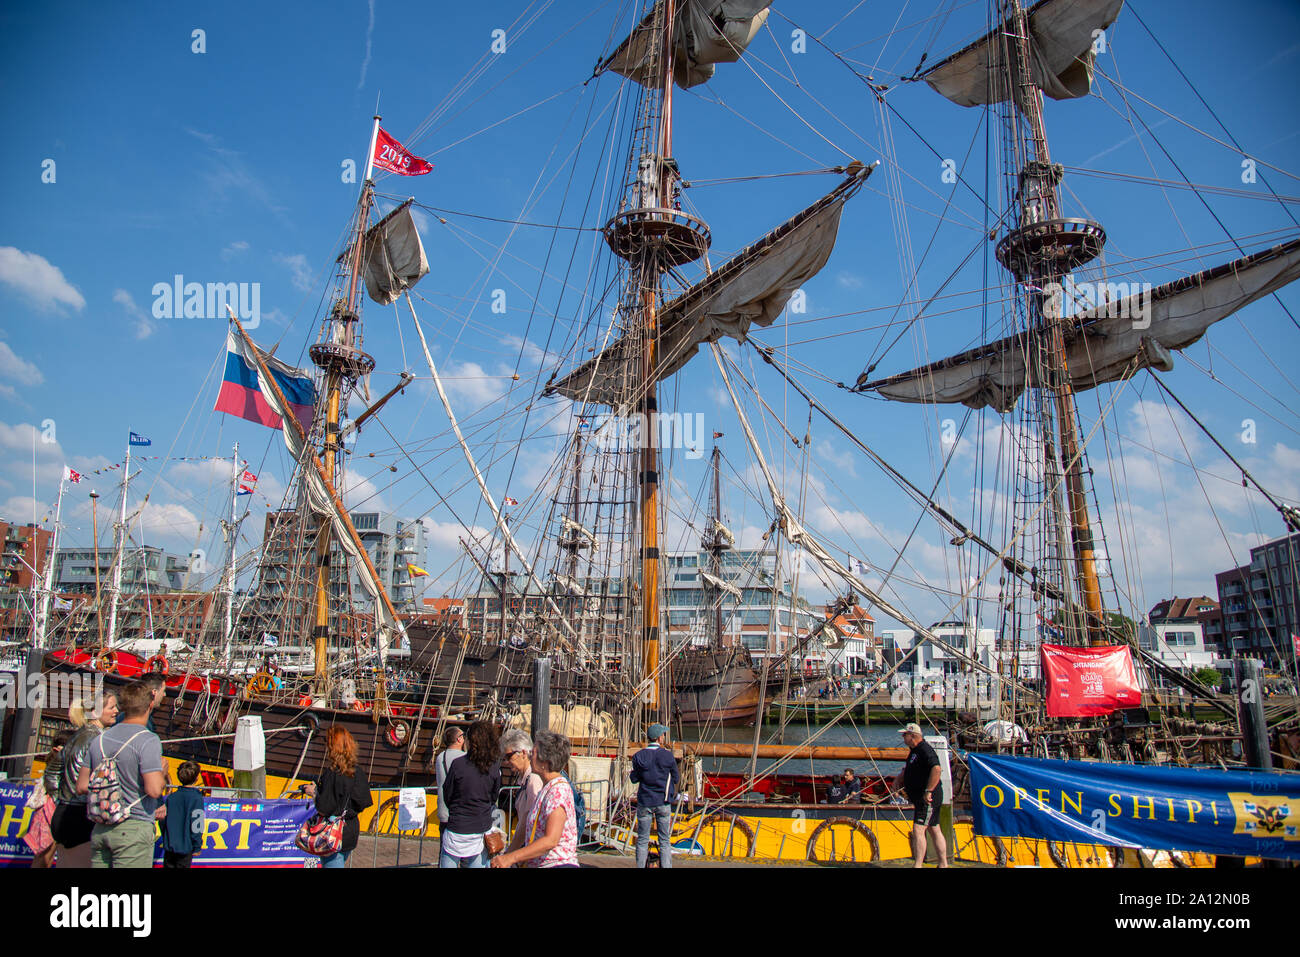 Sail 2019 Scheveningen with tall ships in the harbor Stock Photo